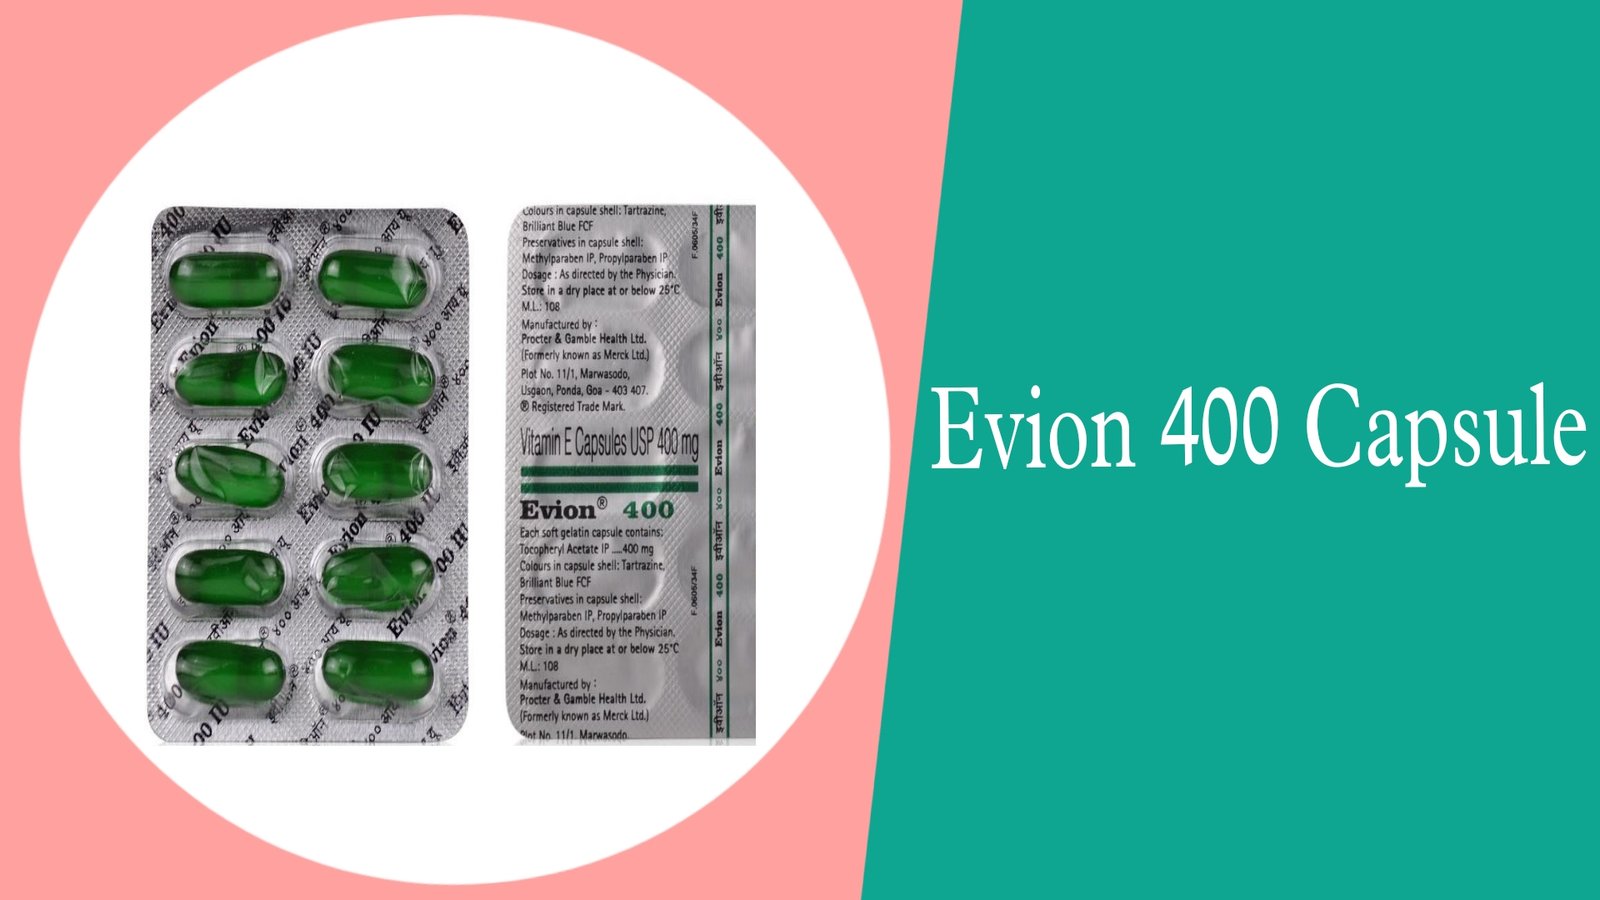 Evion 400 Vitamin E capsule 30 Capsules products price 20900  Medical  Store at Crowdstage store in Feezitalcom